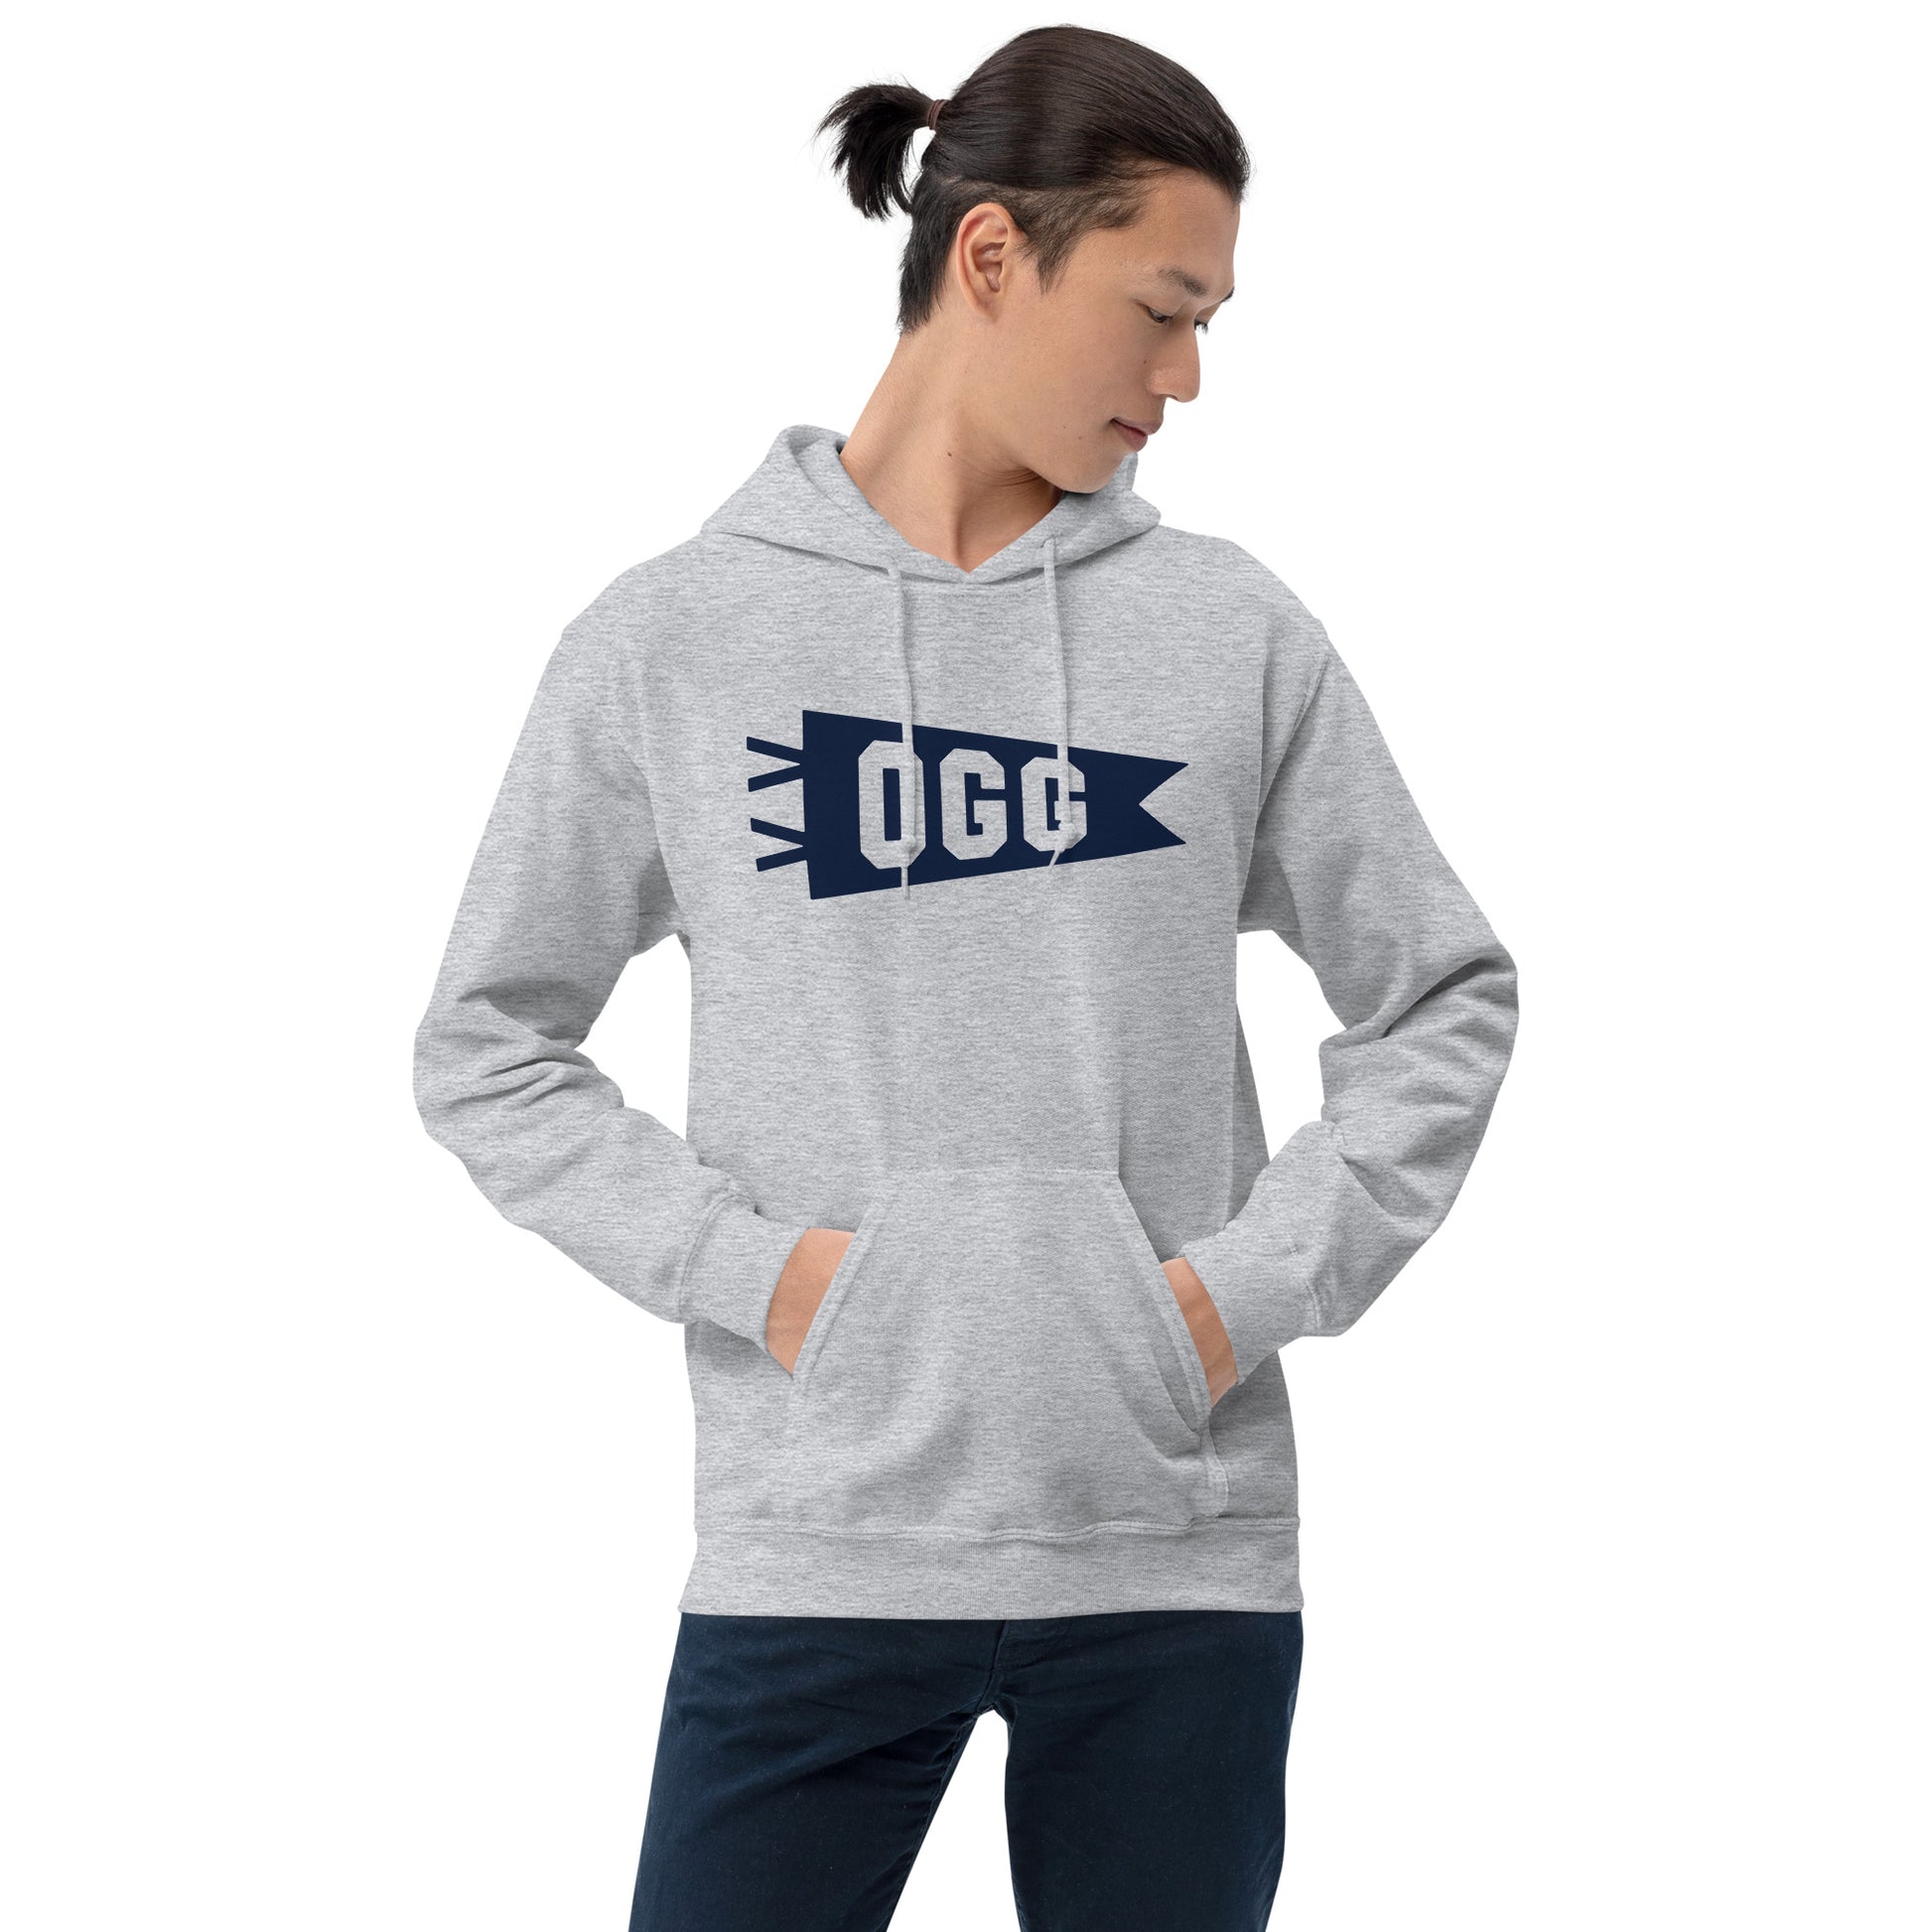 Airport Code Unisex Hoodie - Navy Blue Graphic • OGG Maui • YHM Designs - Image 07